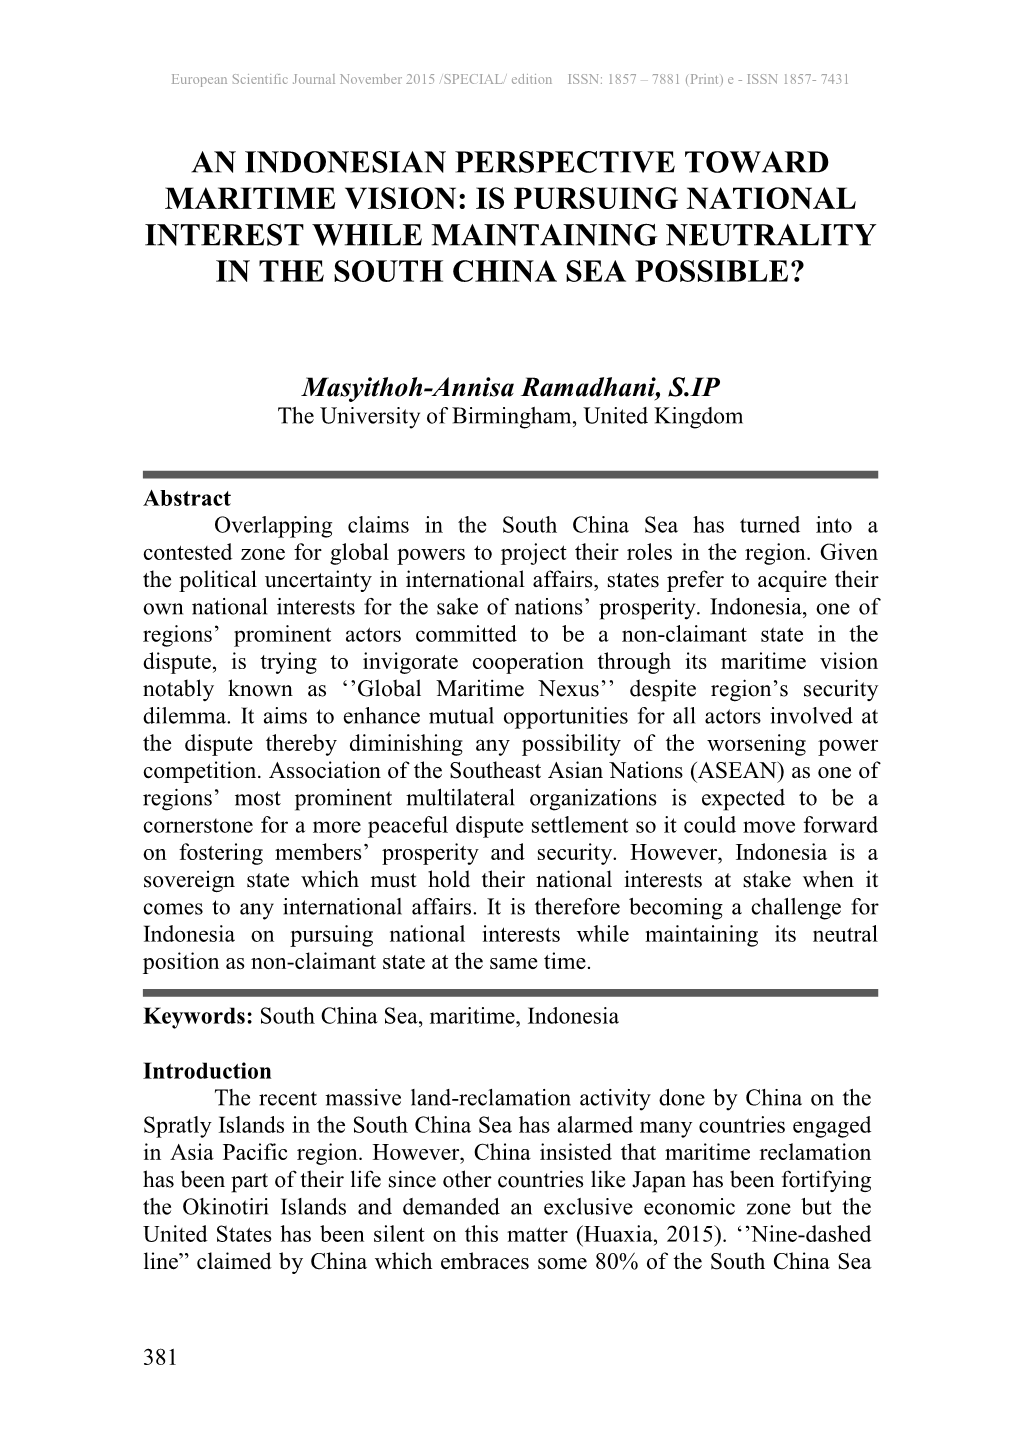 An Indonesian Perspective Toward Maritime Vision: Is Pursuing National Interest While Maintaining Neutrality in the South China Sea Possible?